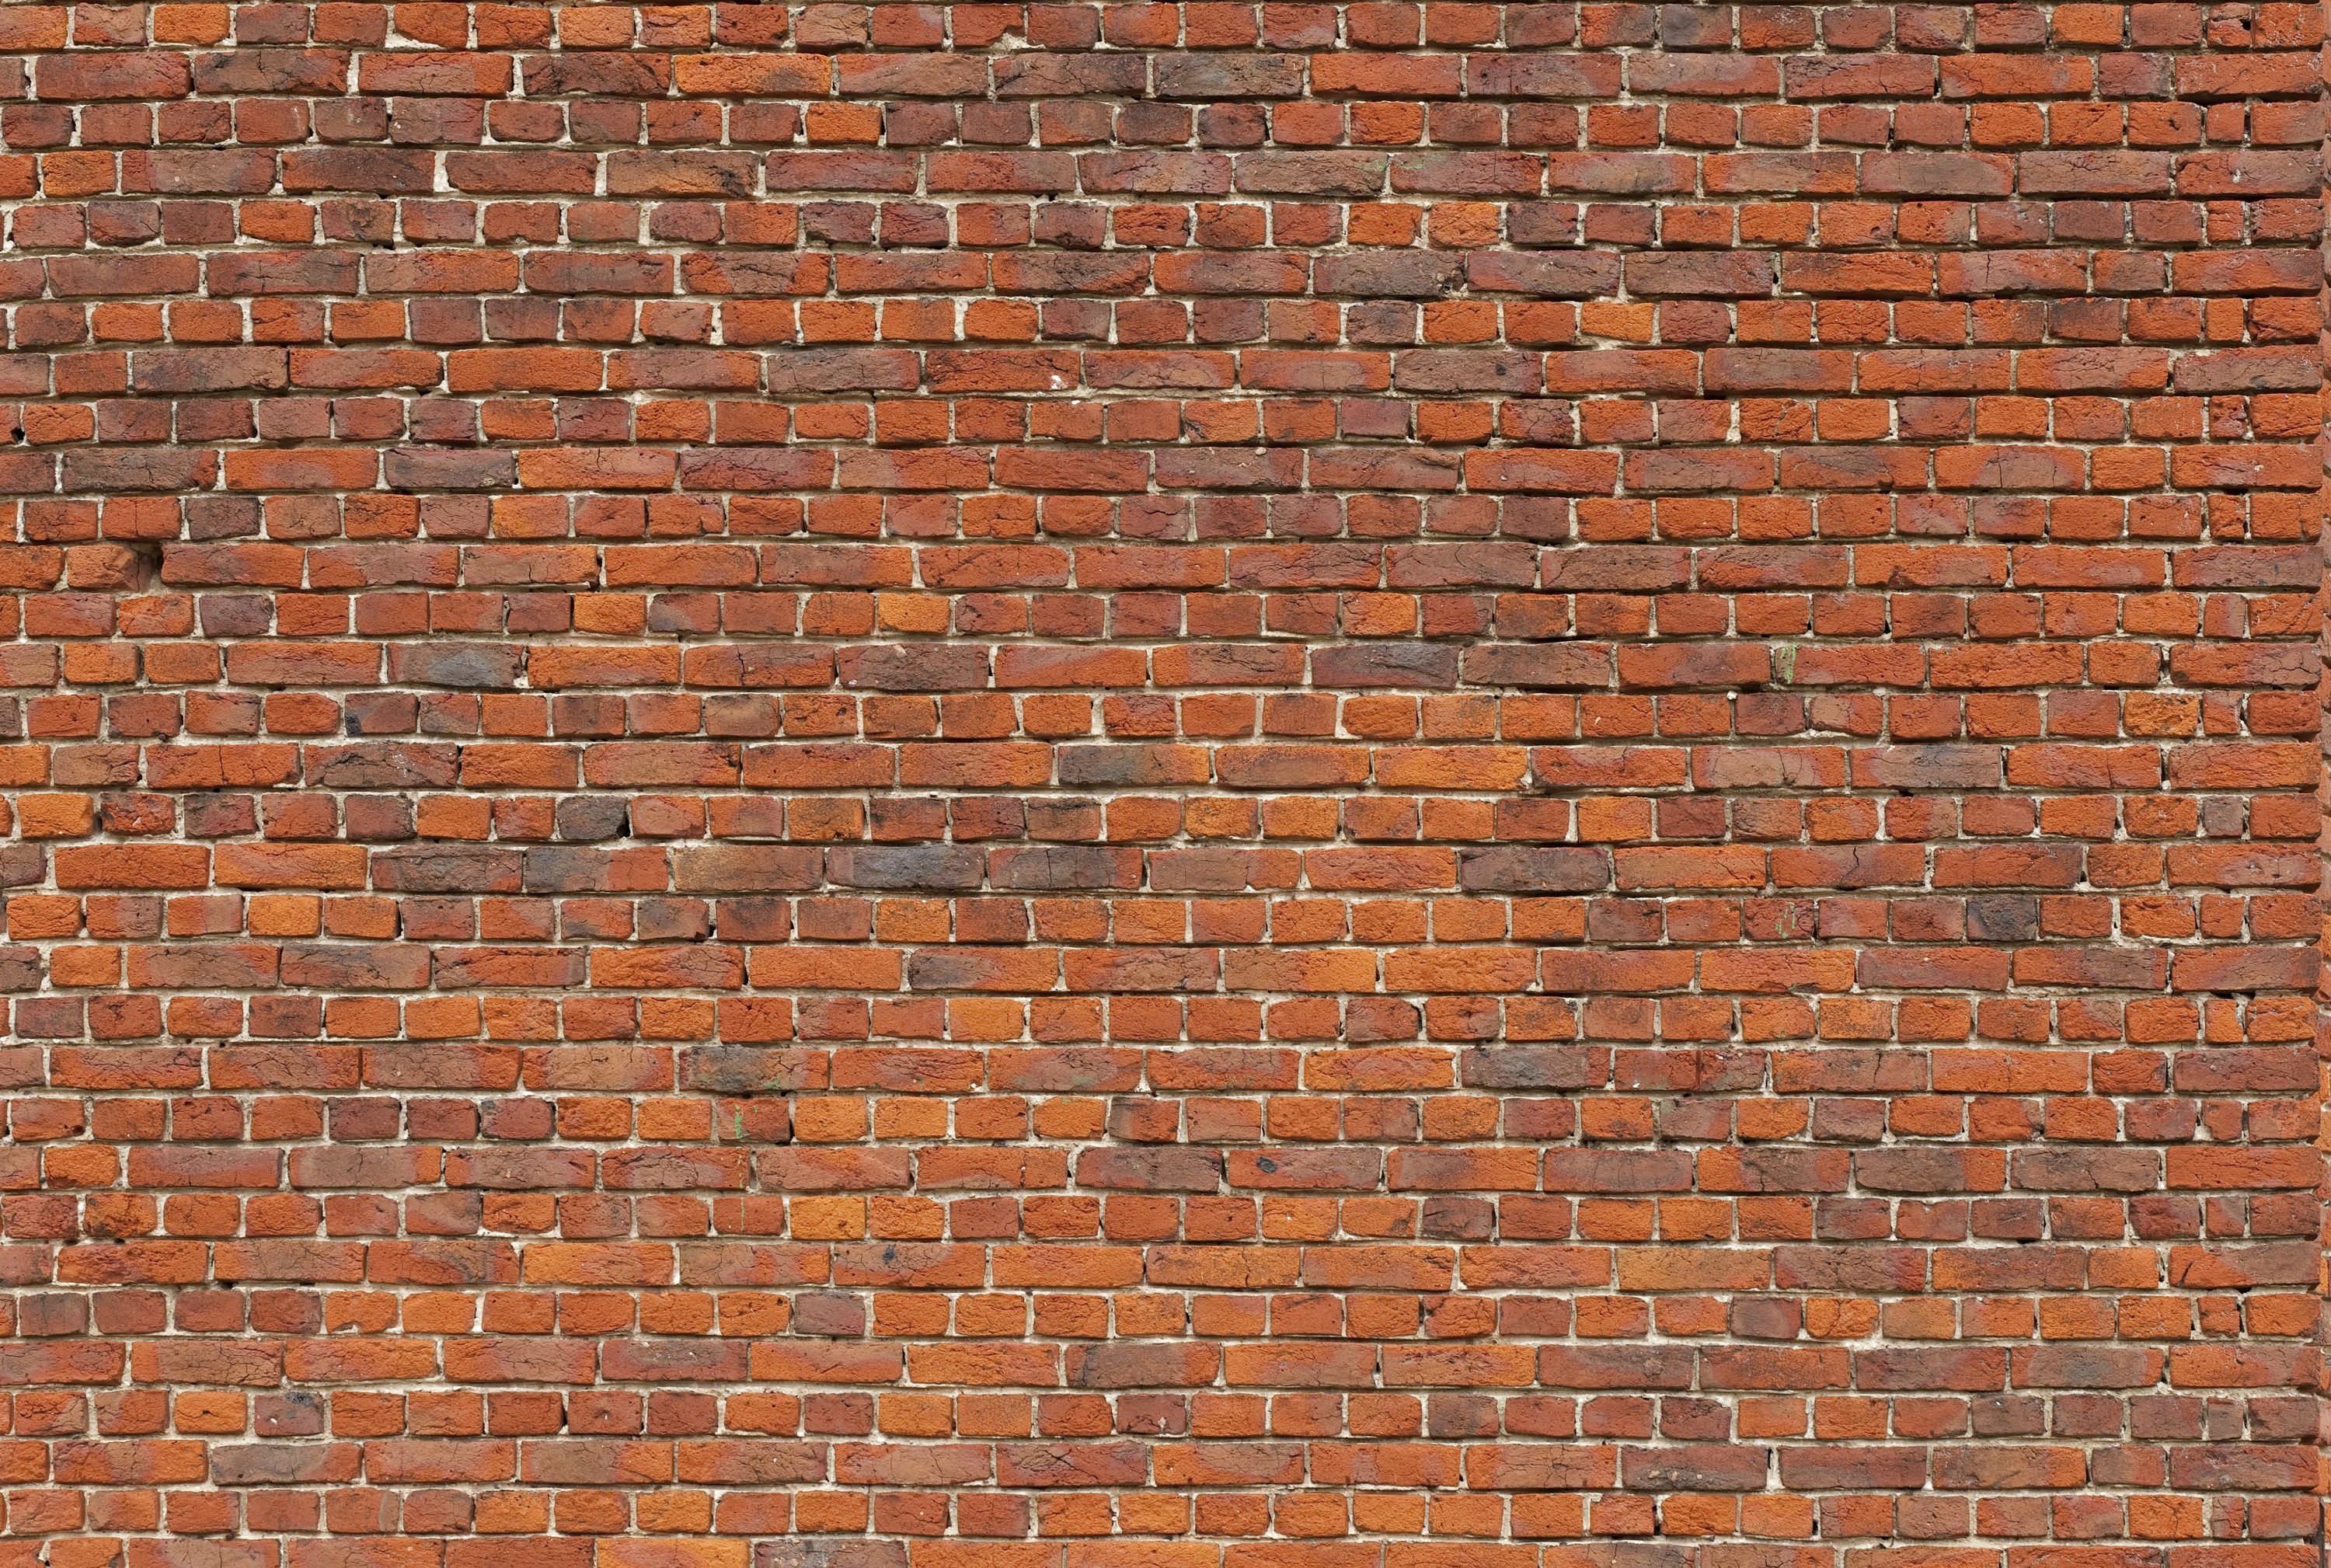 Brick Backgrounds Group 56 - brick wall free textures 01 roblox